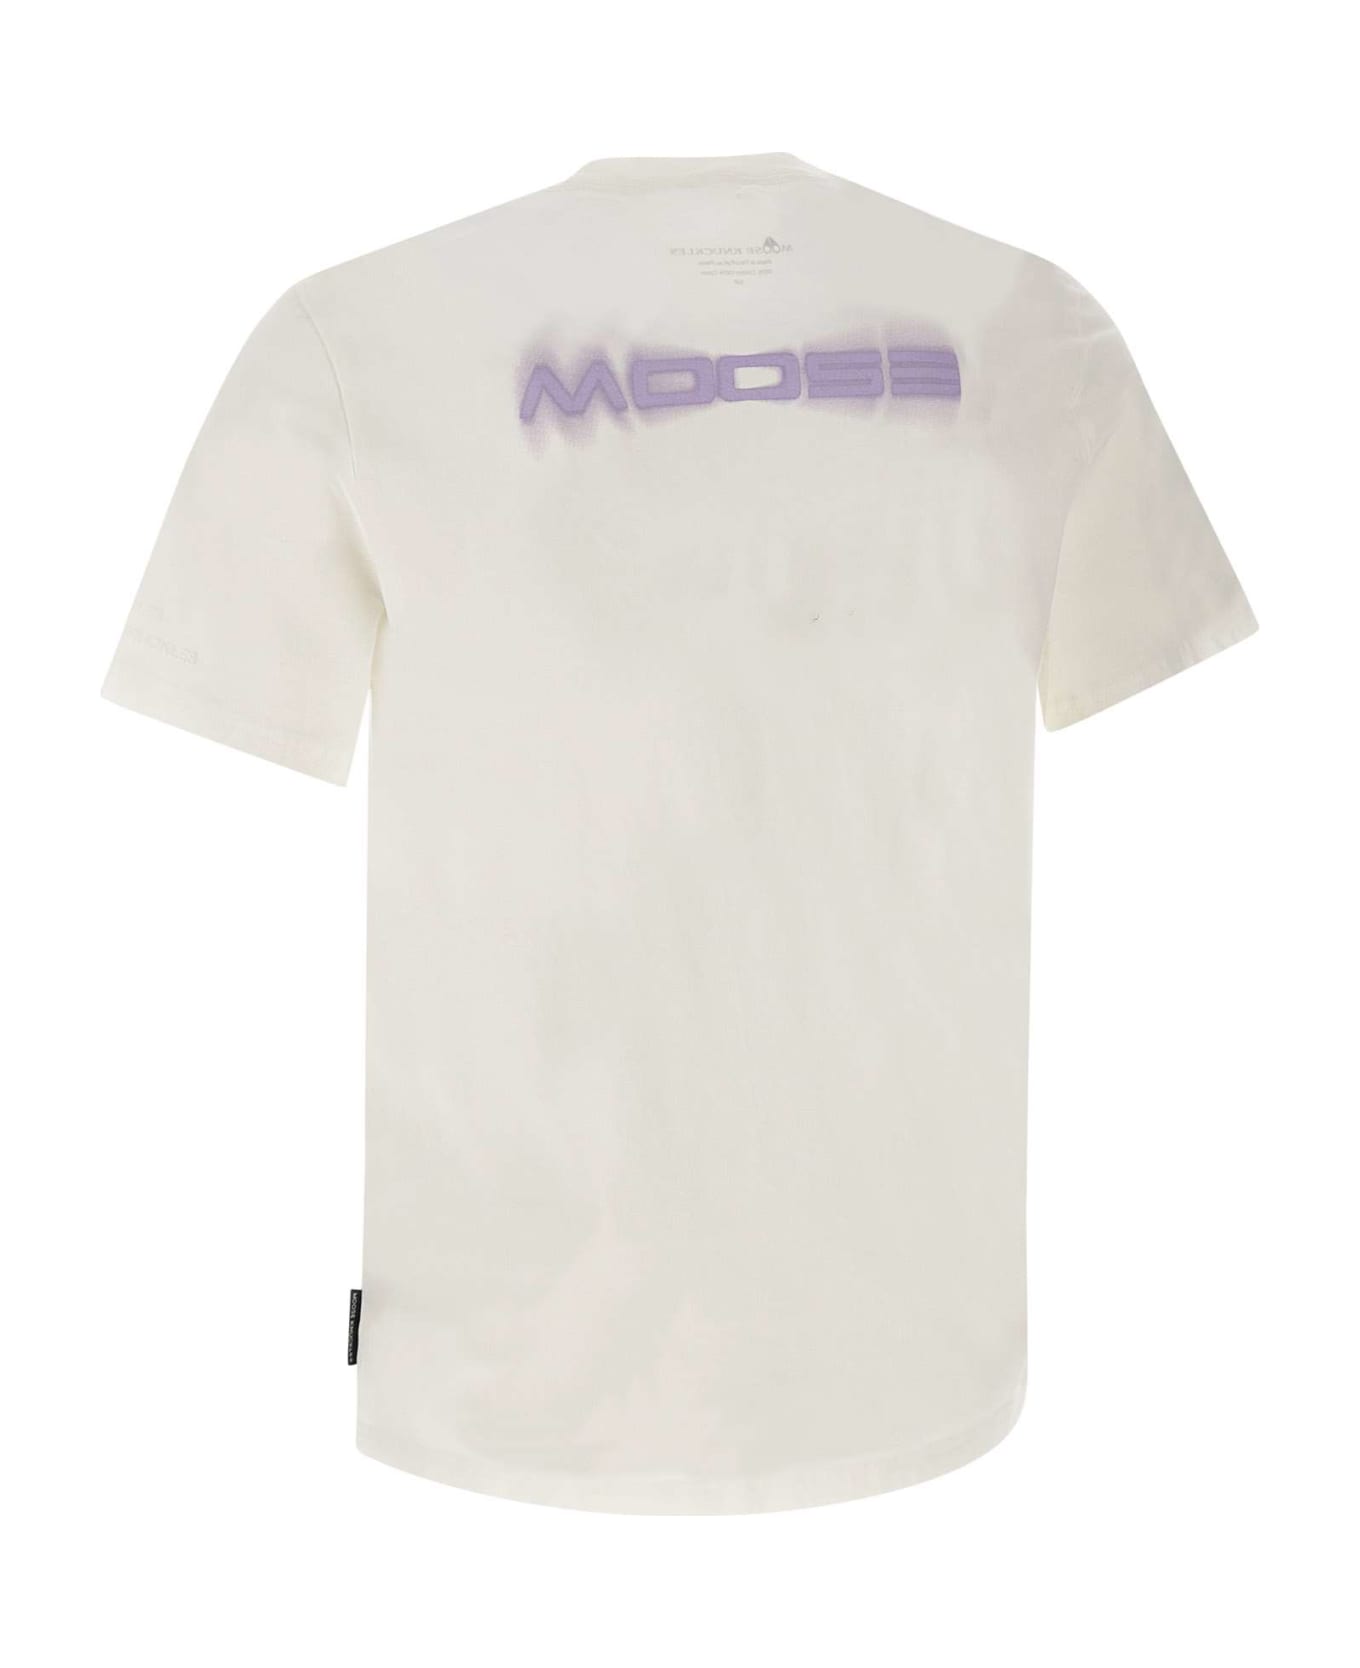 Moose Knuckles "maurice" Cotton T-shirt - WHITE